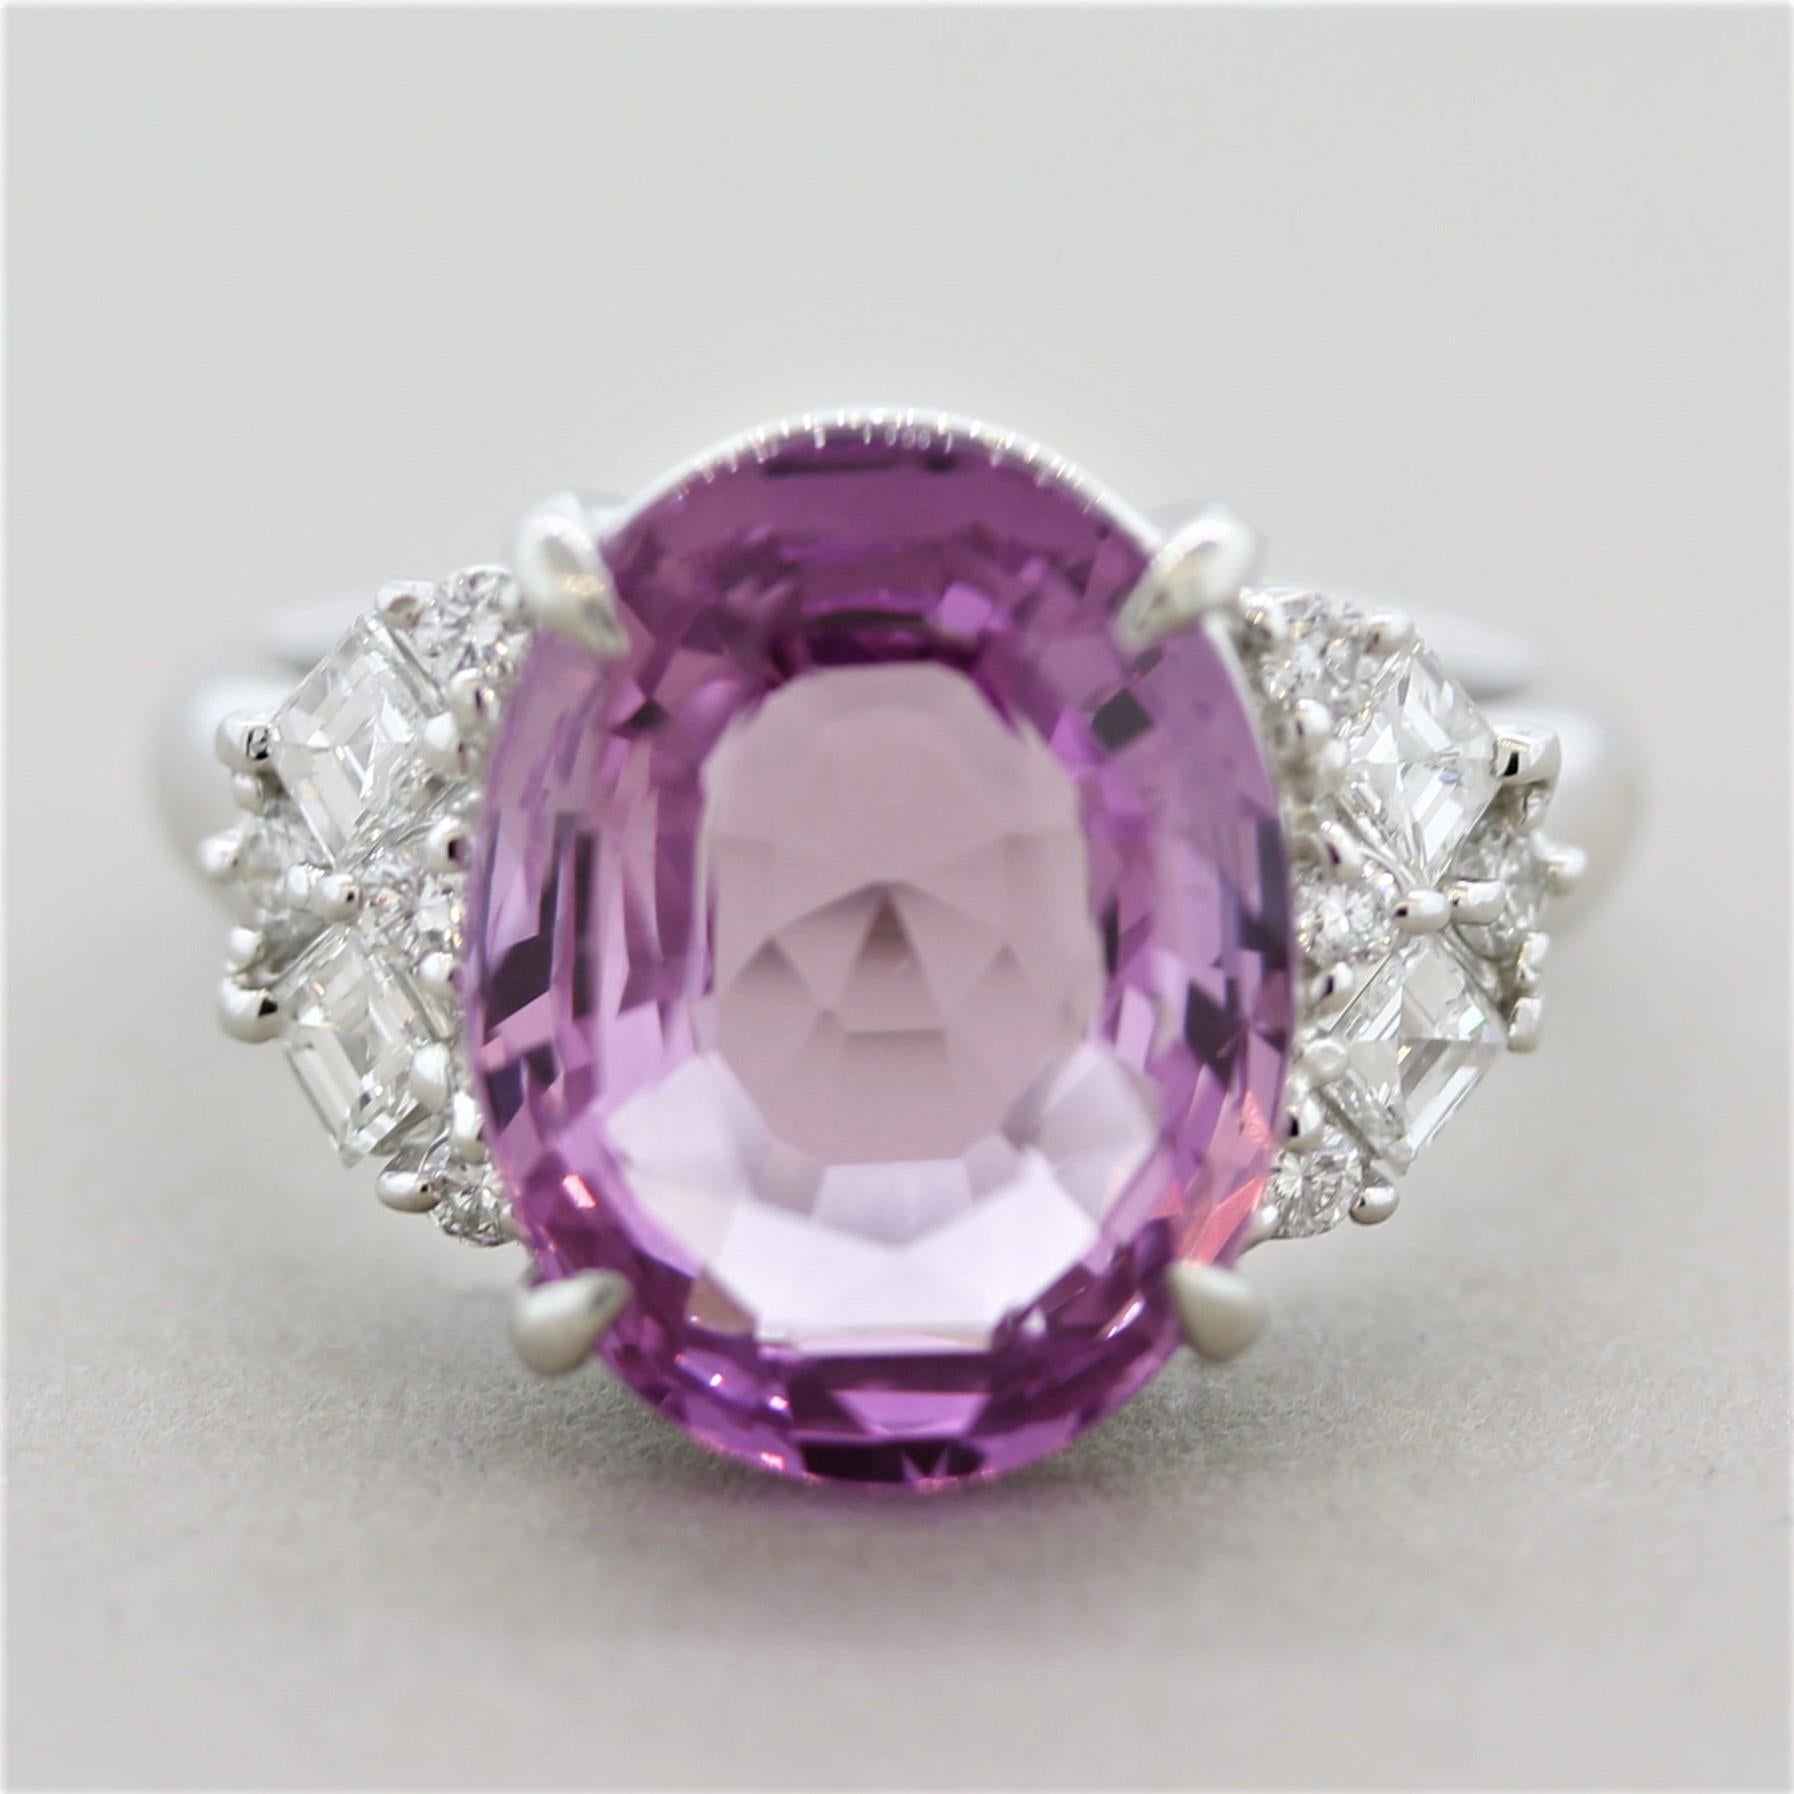 A large and impressive 8.04 carat purple-pink sapphire certified as natural by the GIA! It has a beautiful rich purple-pink color and is free from any eye-visible inclusions allowing the stones natural brilliance to showcase. It is accented by 0.64